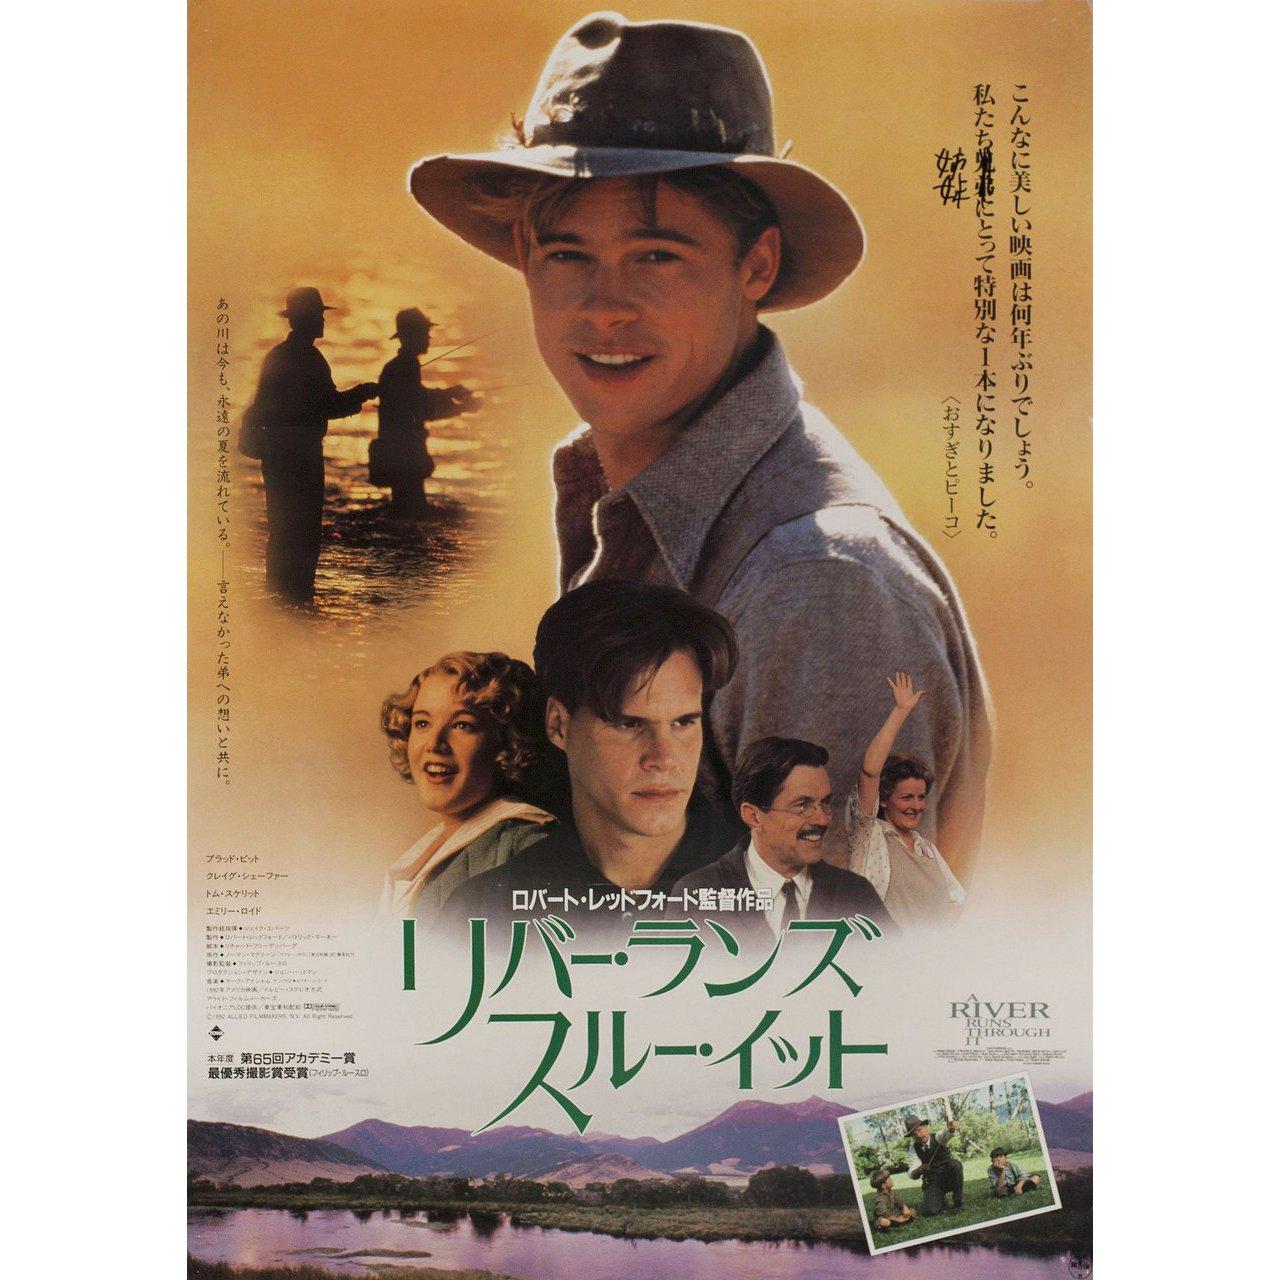 Original 1993 Japanese B2 poster for the film A River Runs Through It directed by Robert Redford with Craig Sheffer / Brad Pitt / Tom Skerritt / Brenda Blethyn. Very good-fine condition, rolled. Please note: the size is stated in inches and the